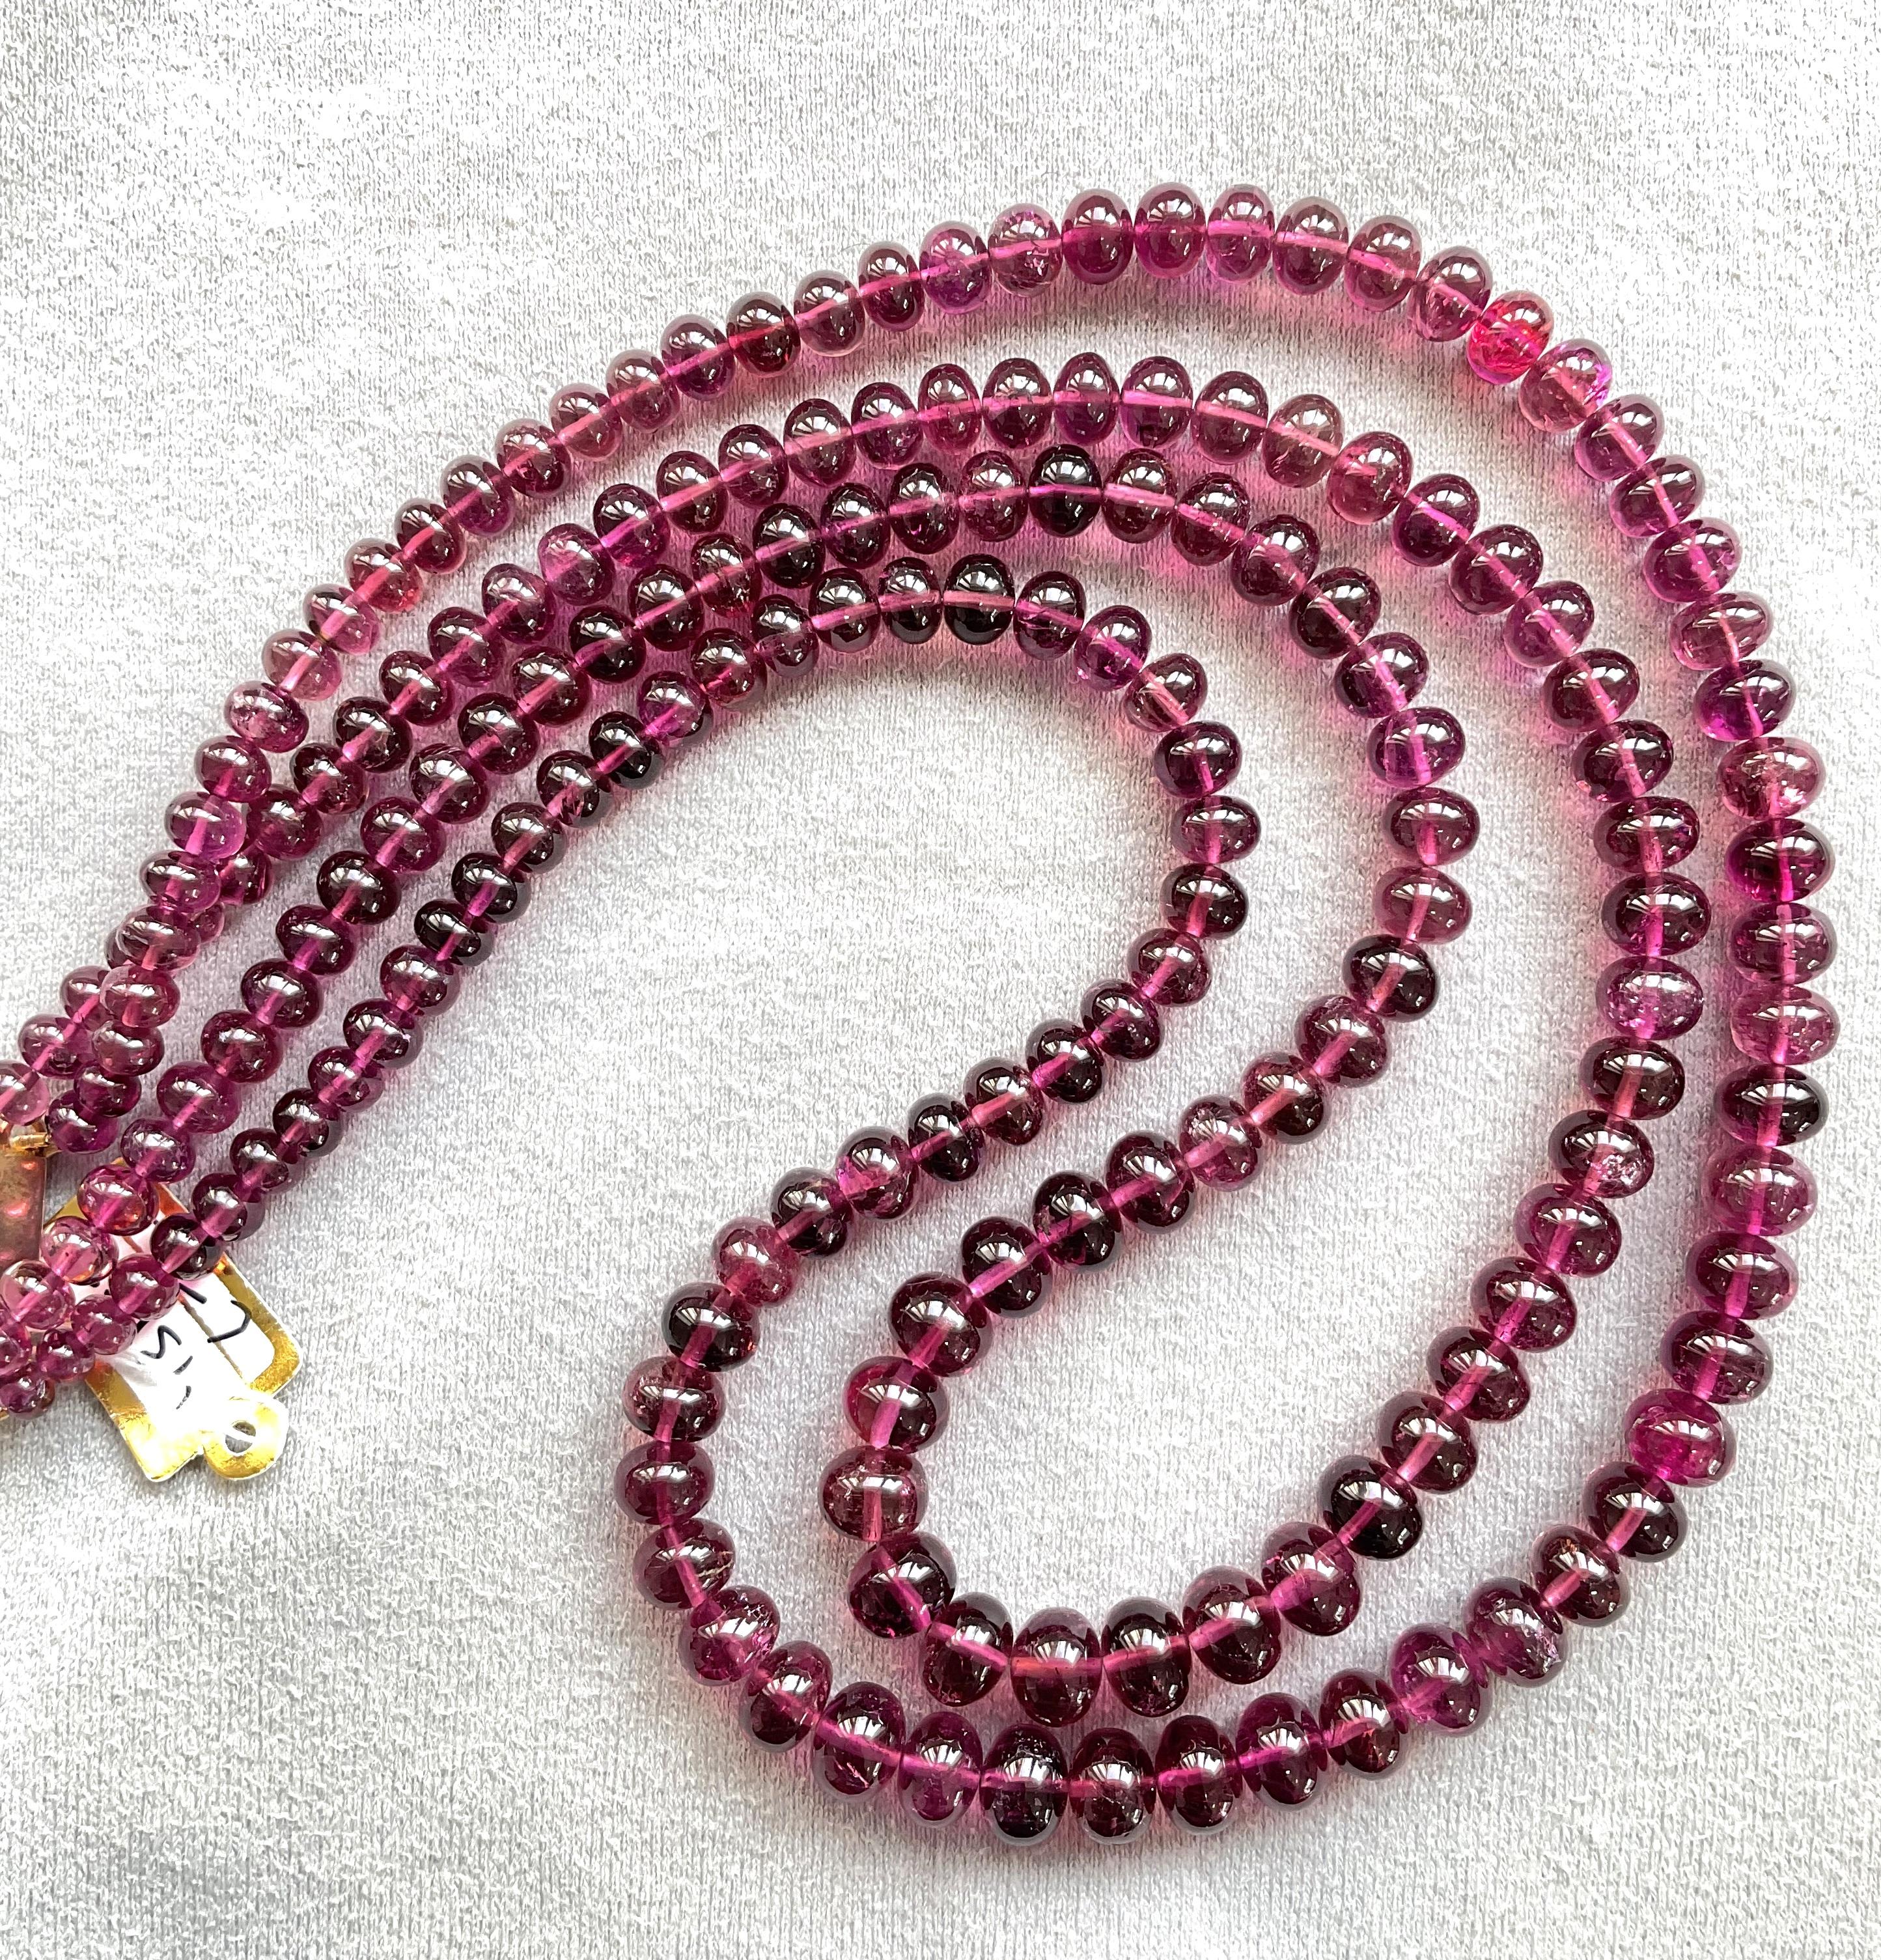 Women's or Men's 431.00 Carats Rubellite Tourmaline Plain Beads For Top Fine Jewelry Natural Gem For Sale